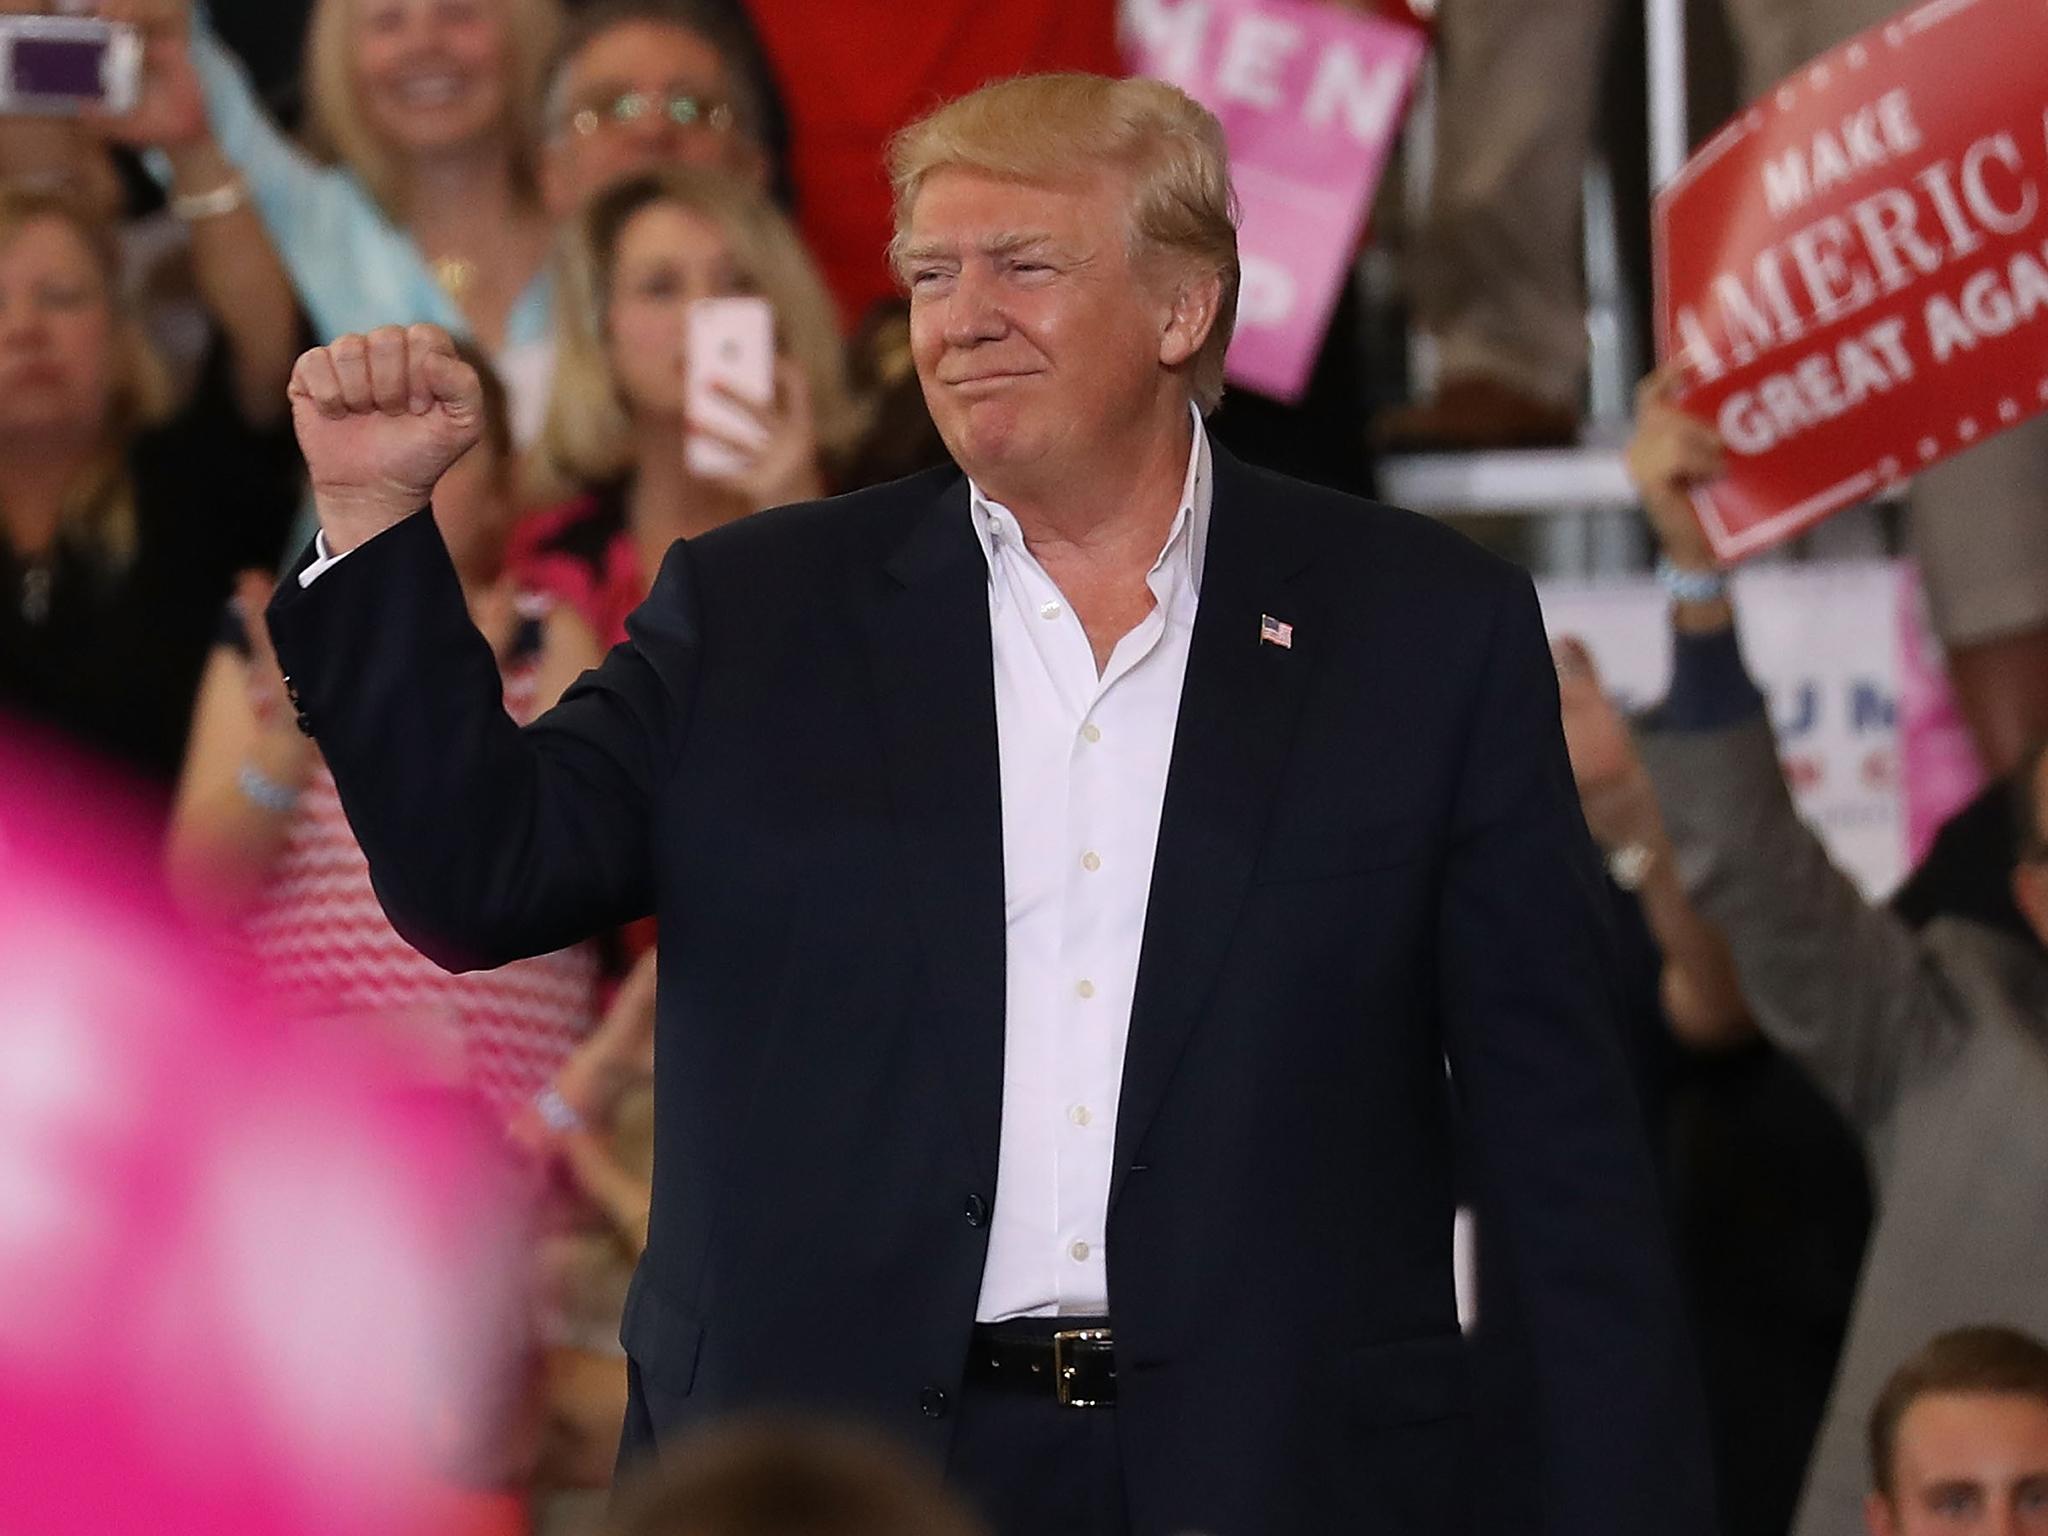 &#13;
Donald Trump supported the idea of 'safe zones' at a supporters' rally in Florida Getty Images)&#13;